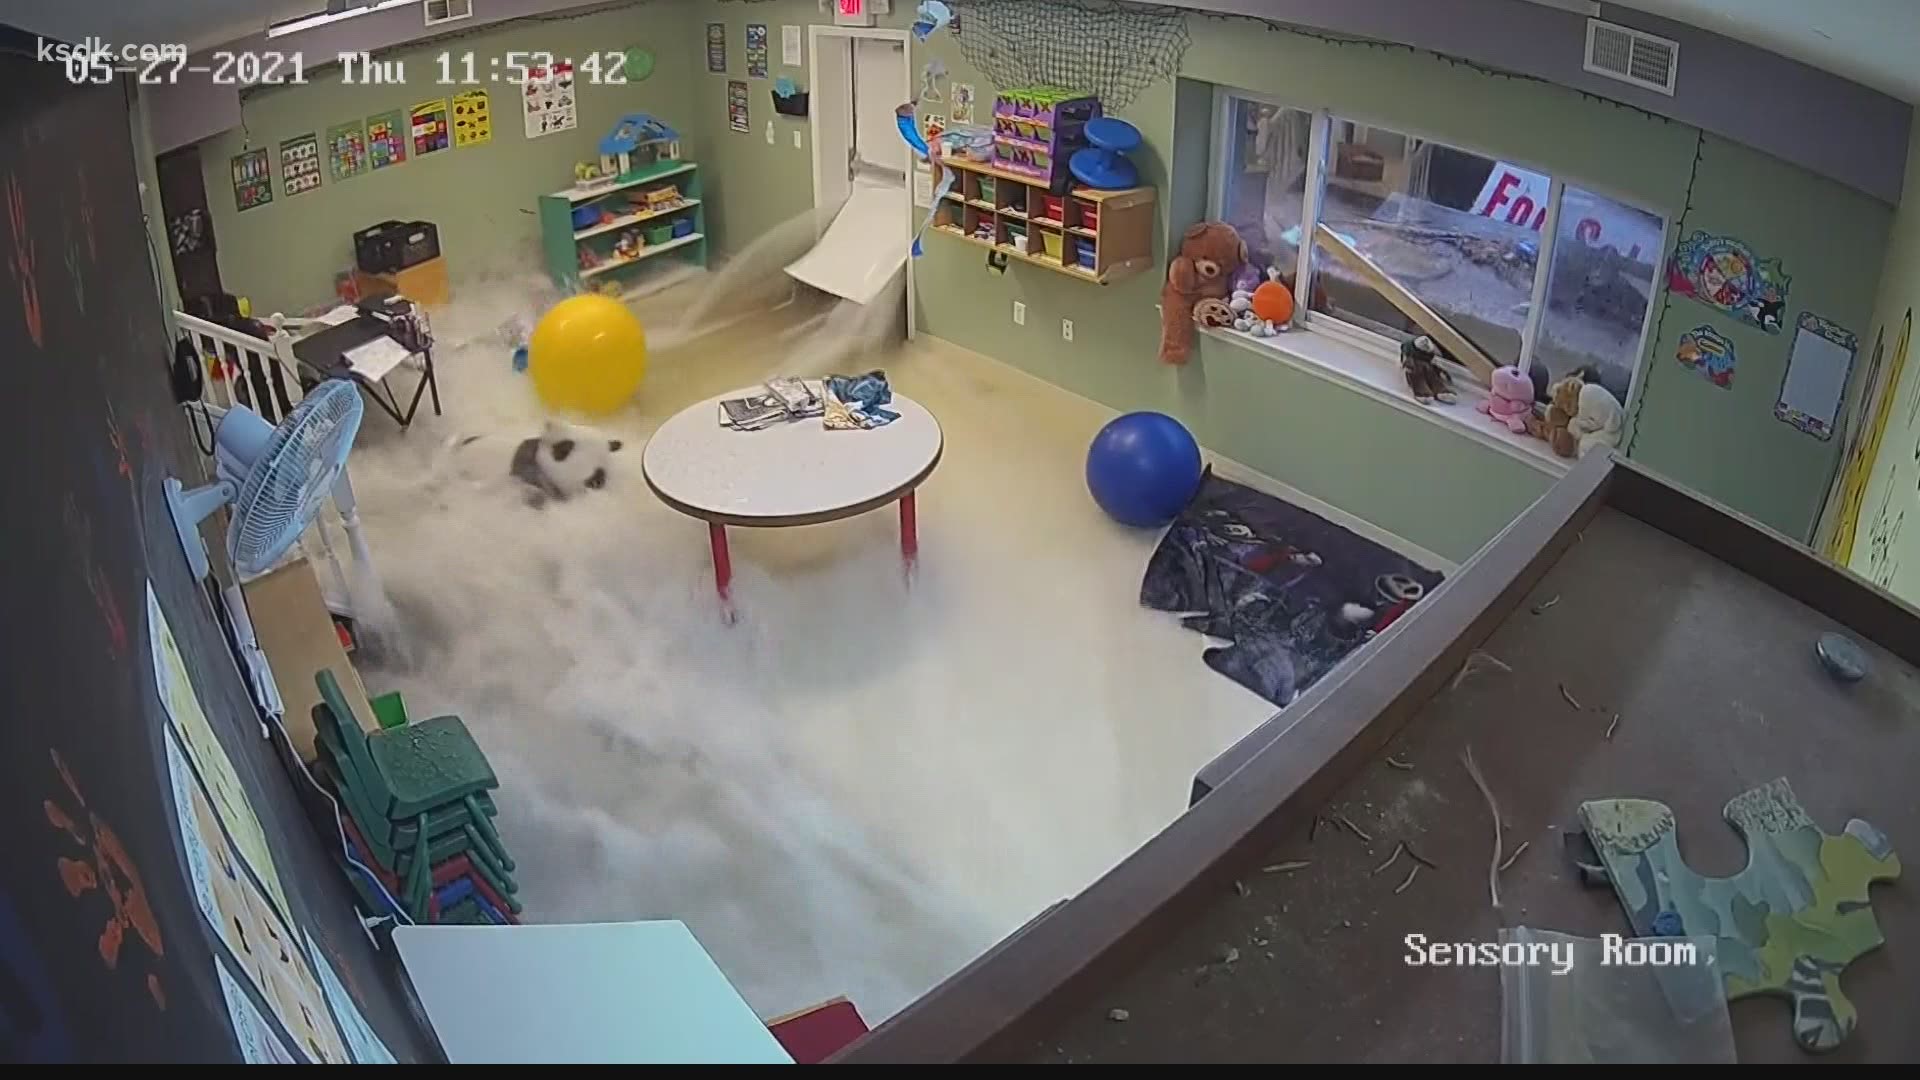 Future Stars Academy's playroom was suddenly flooded Thursday in a large storm. Kids and staff were safe, but the toys for kids with special needs were destroyed.